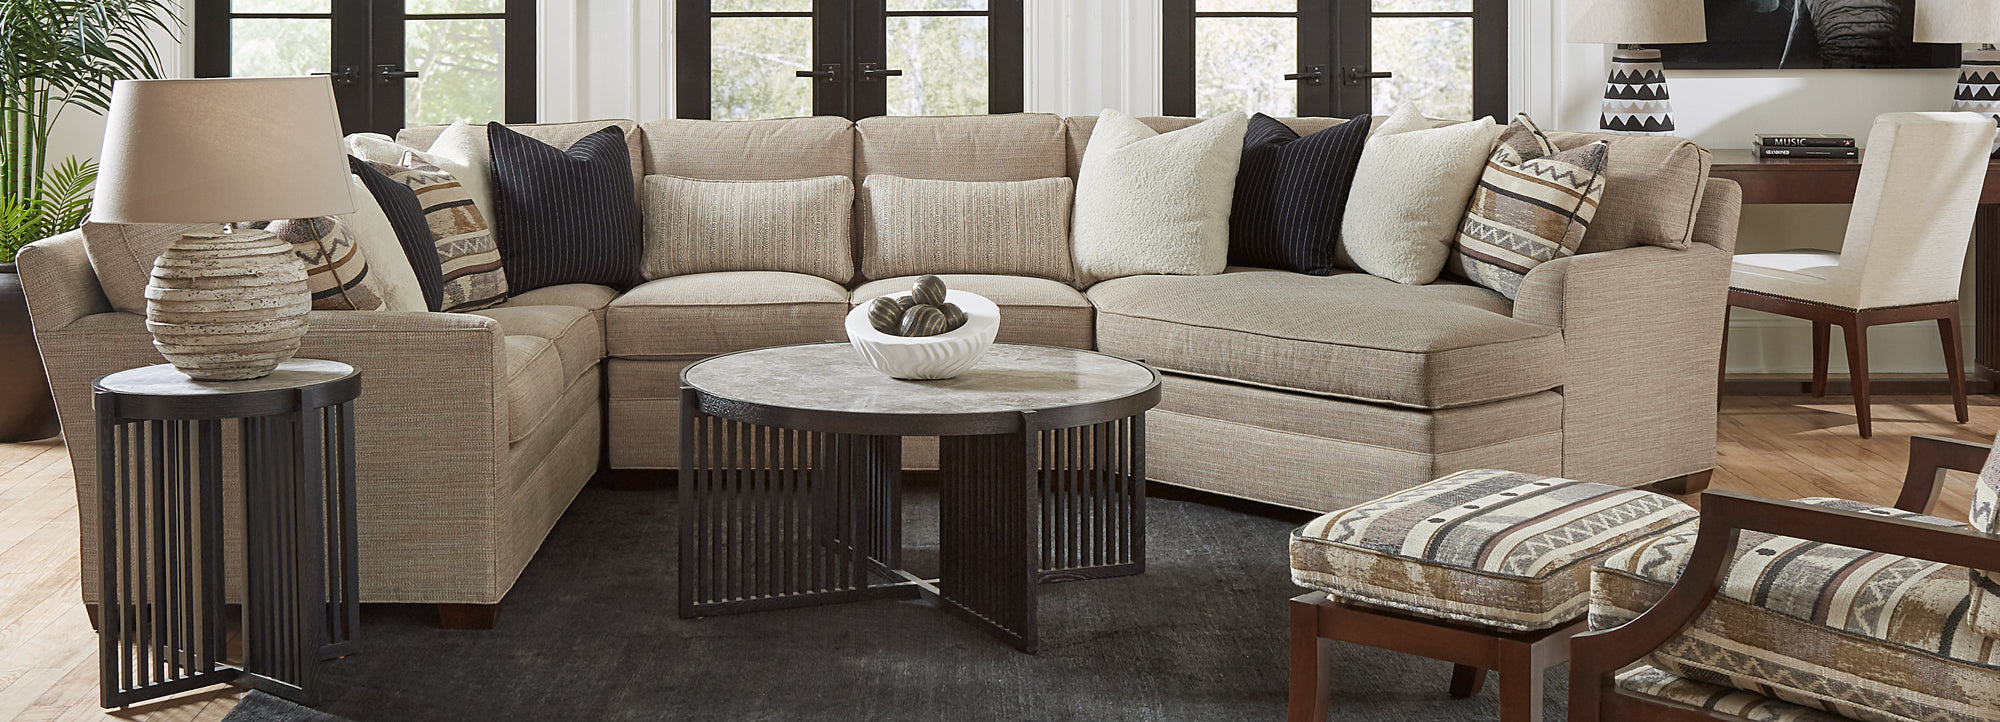 Stickley Furniture cream colored sectional with dark wood colored coffee and end tables